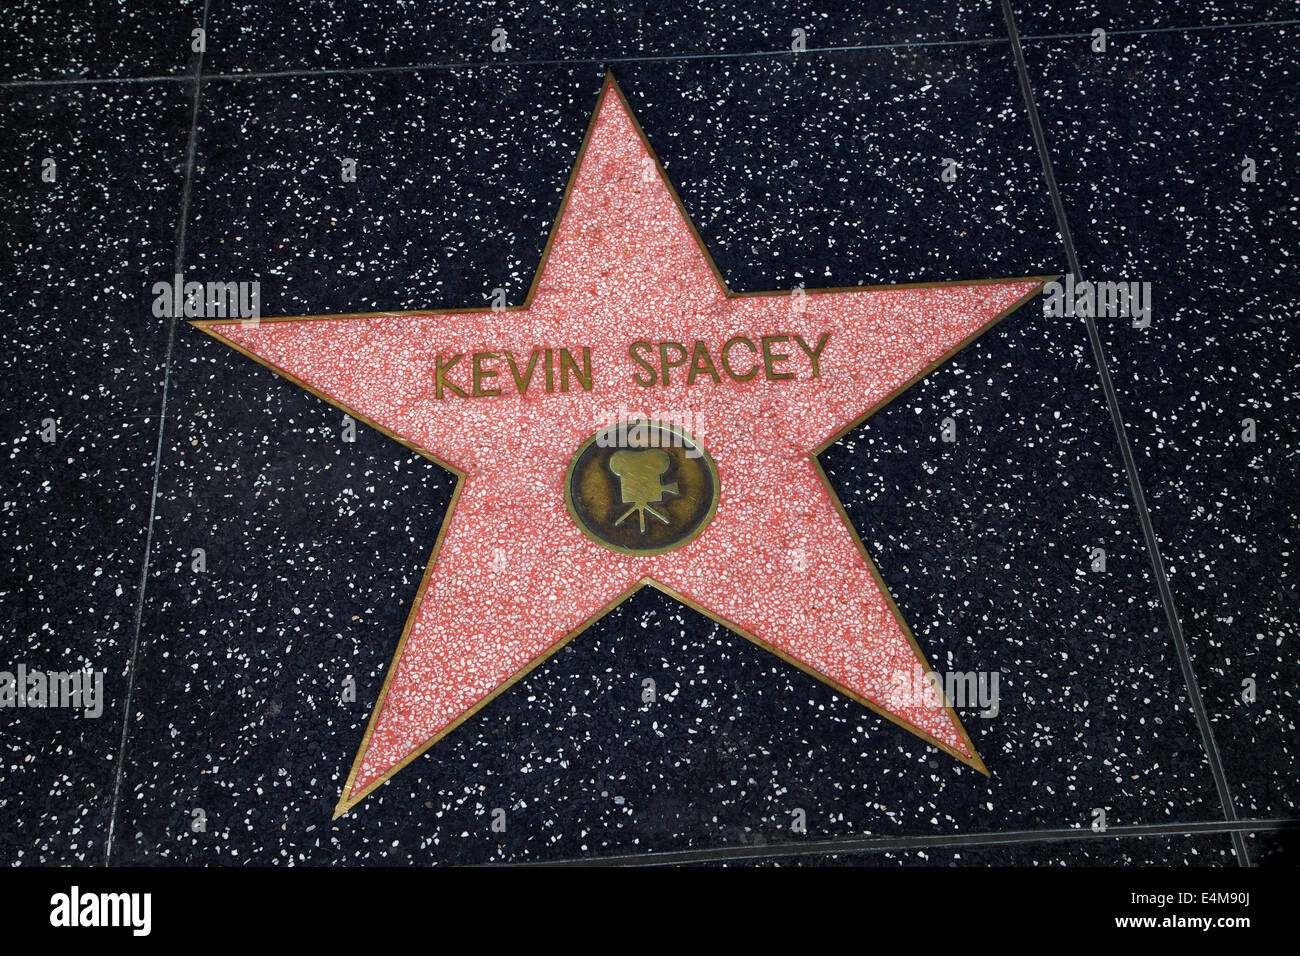 Kevin Spacey star on Hollywood Walk of Fame, Hollywood Boulevard, Hollywood, Los Angeles, California, USA Stock Photo